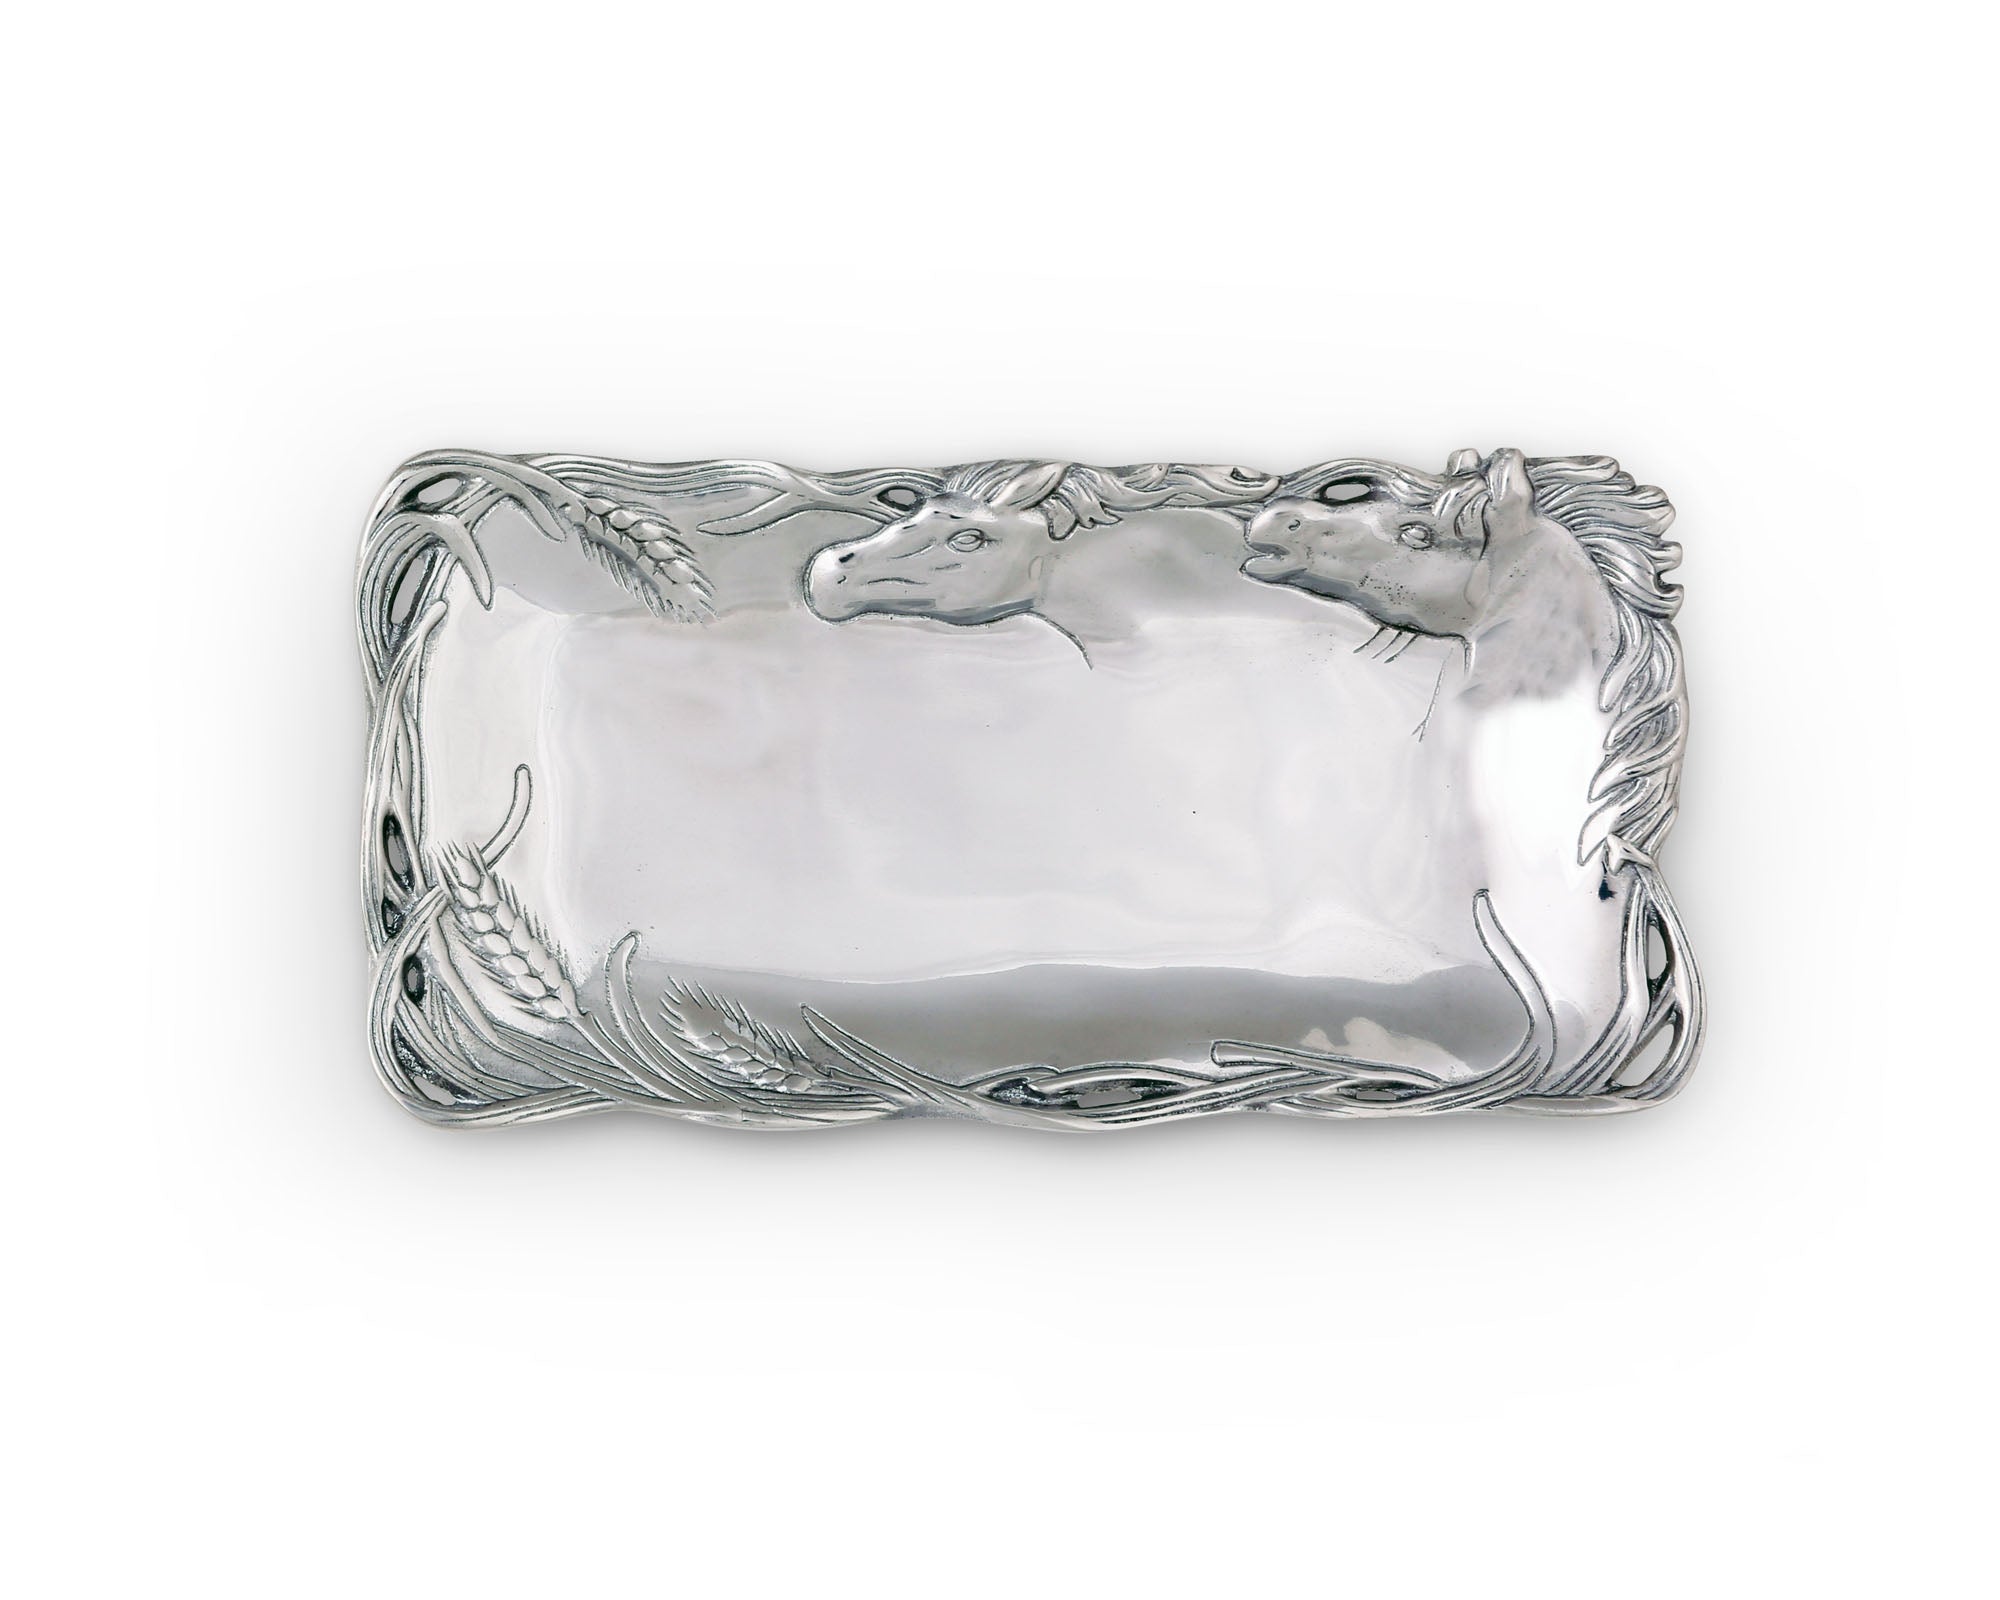 Arthur Court Horse Bread Tray 6x12 Product Image